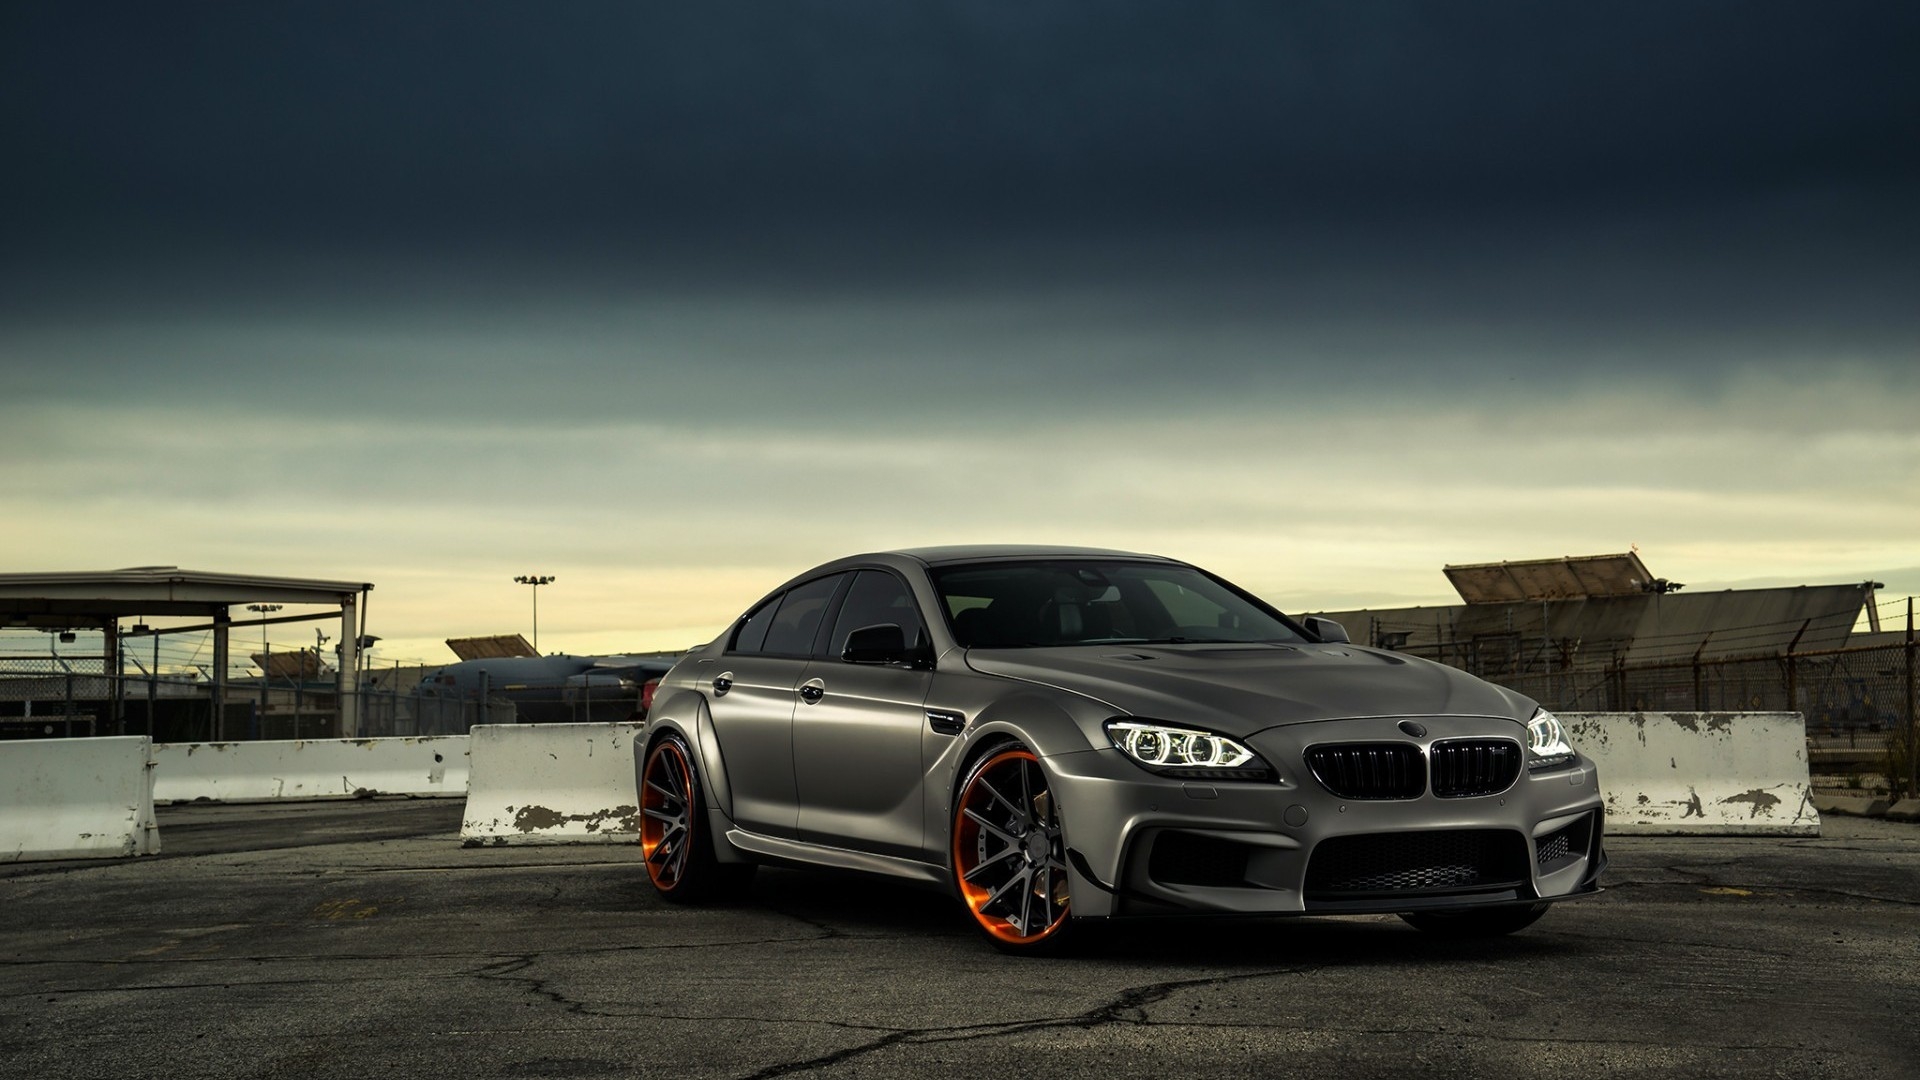 Gorgeous BMW M6 for 1920 x 1080 HDTV 1080p resolution